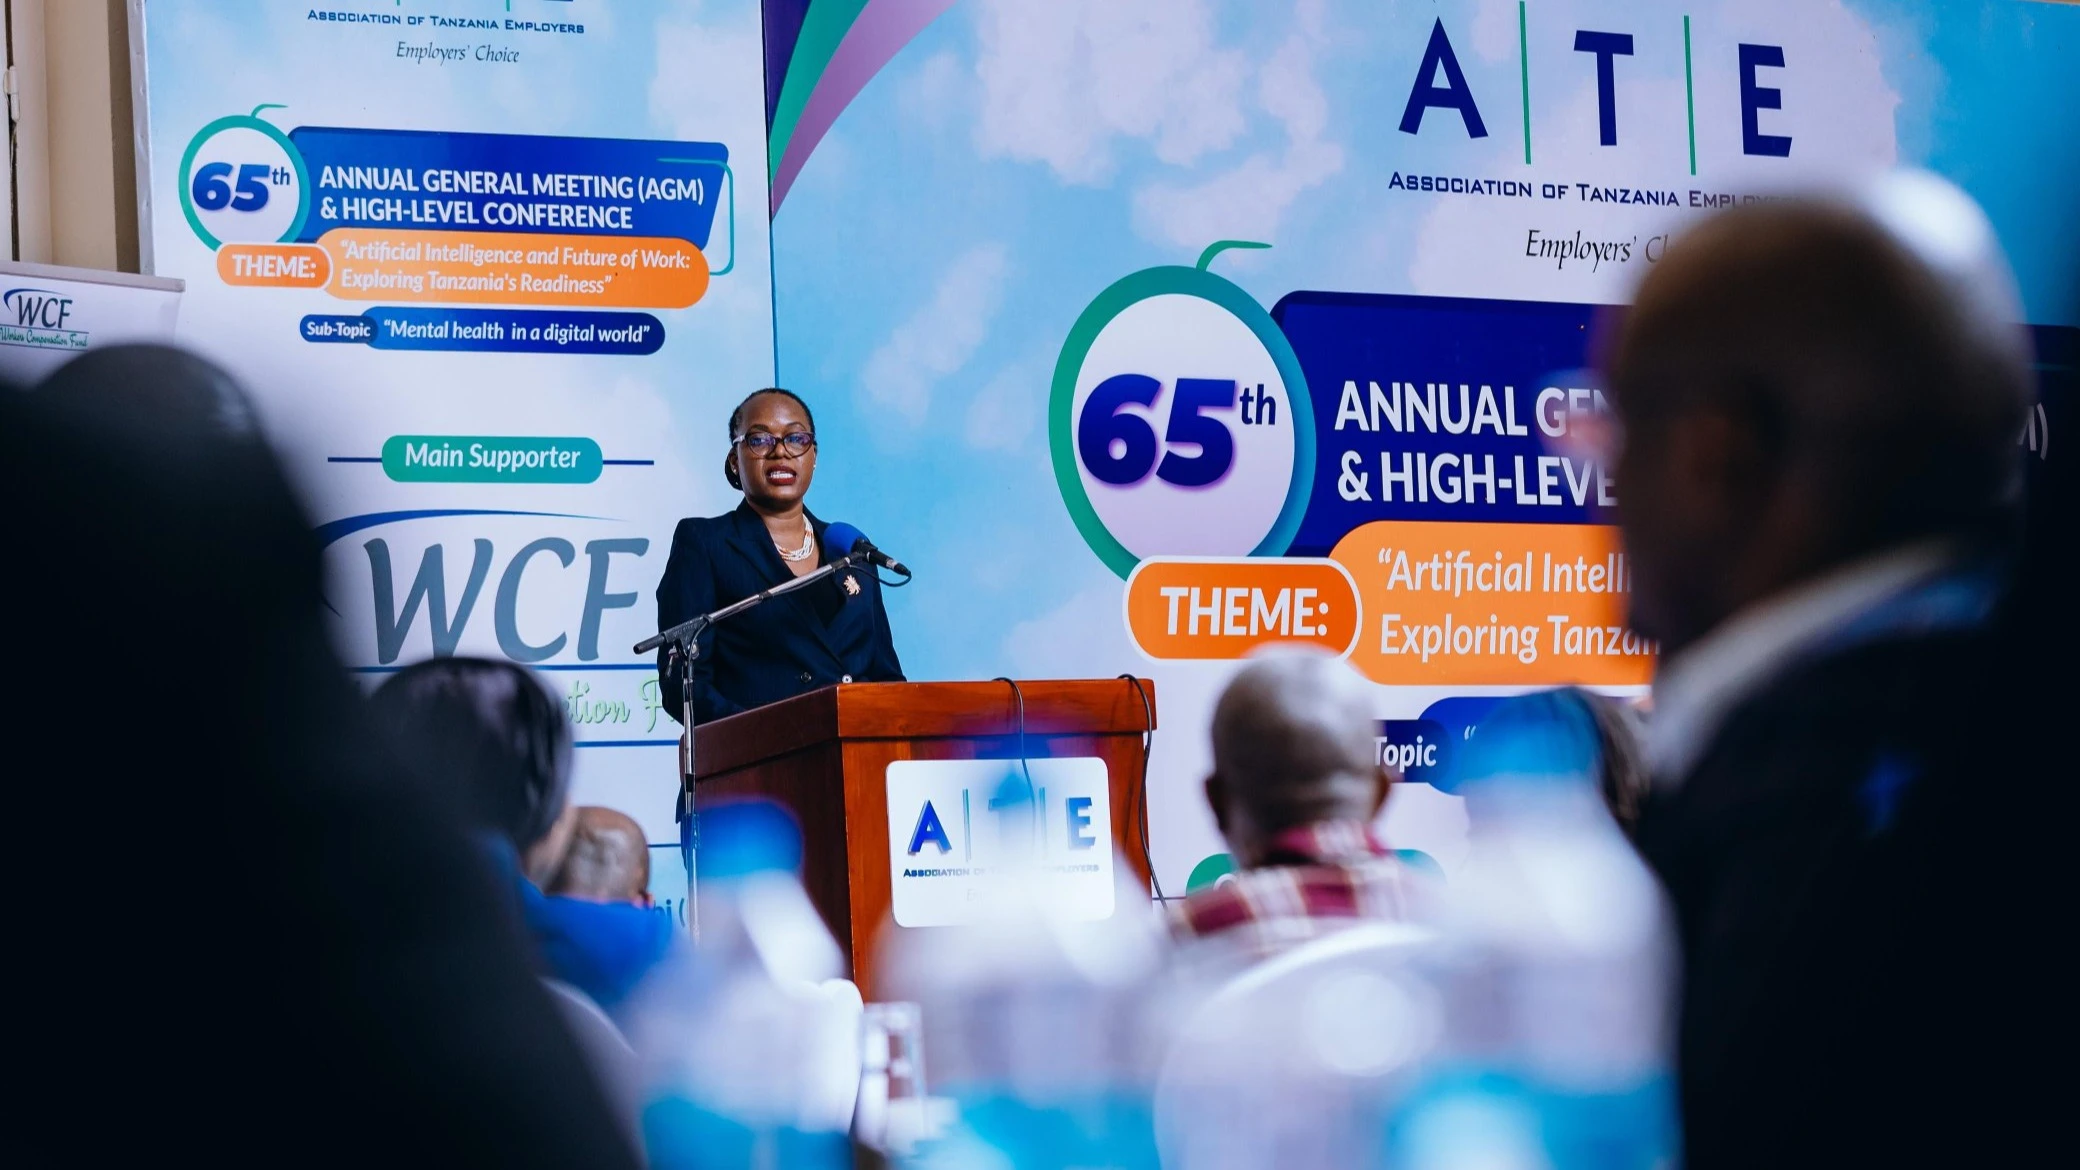 ATE CEO Ms. Suzanne Ndomba-Doran explained some of the importance of artificial intelligence, which includes increased productivity at work, increased efficiency in work, specific services, simplifying work, and many others.